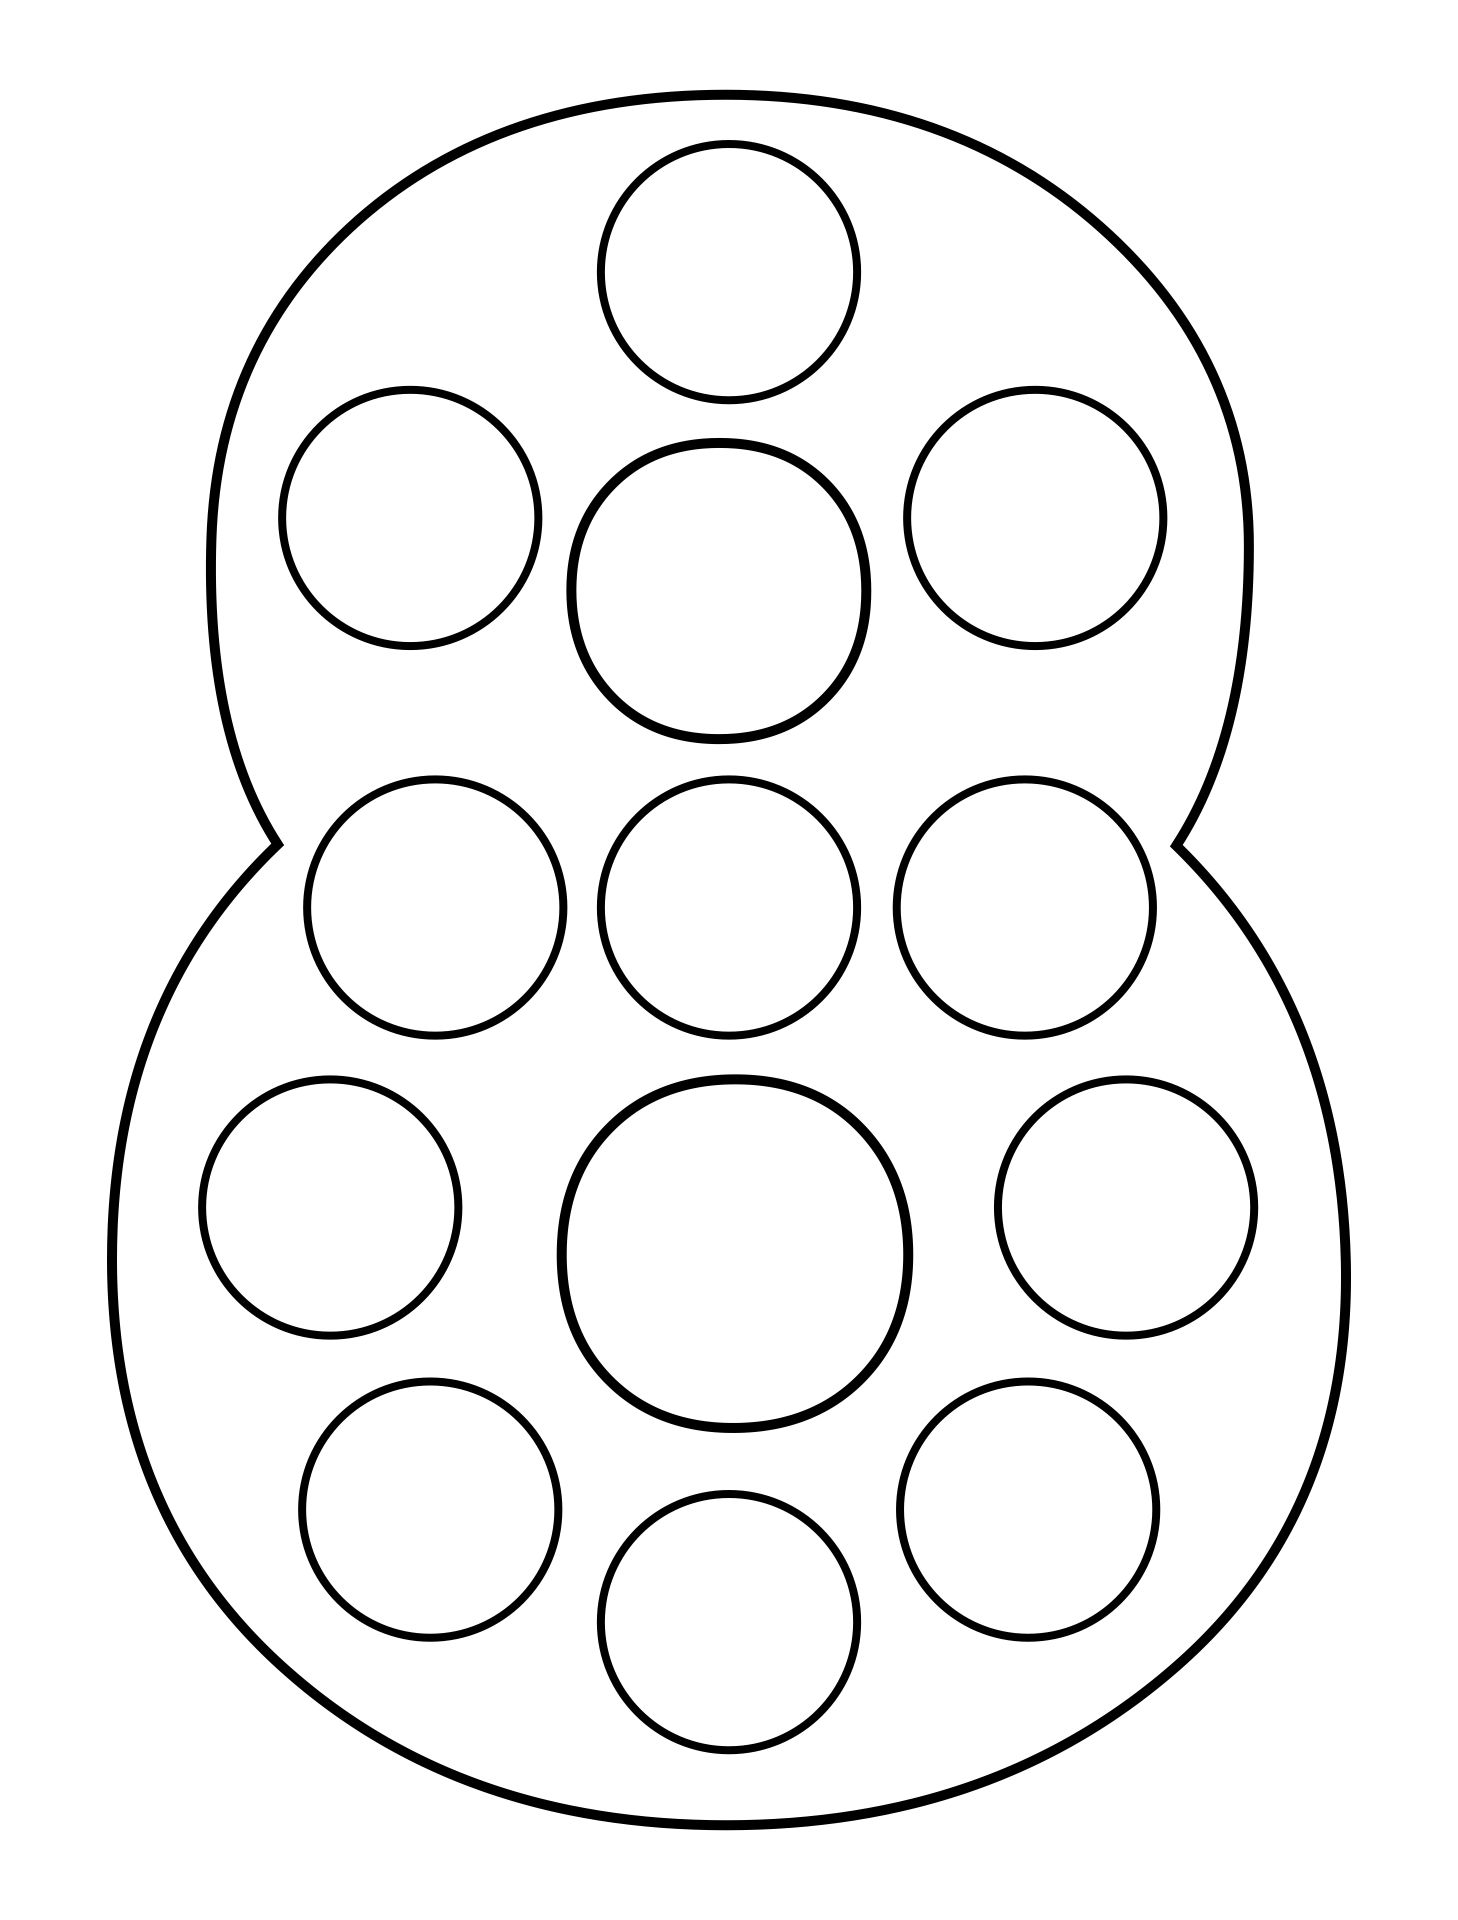 Number 8 Dot Marker Coloring Page Activity